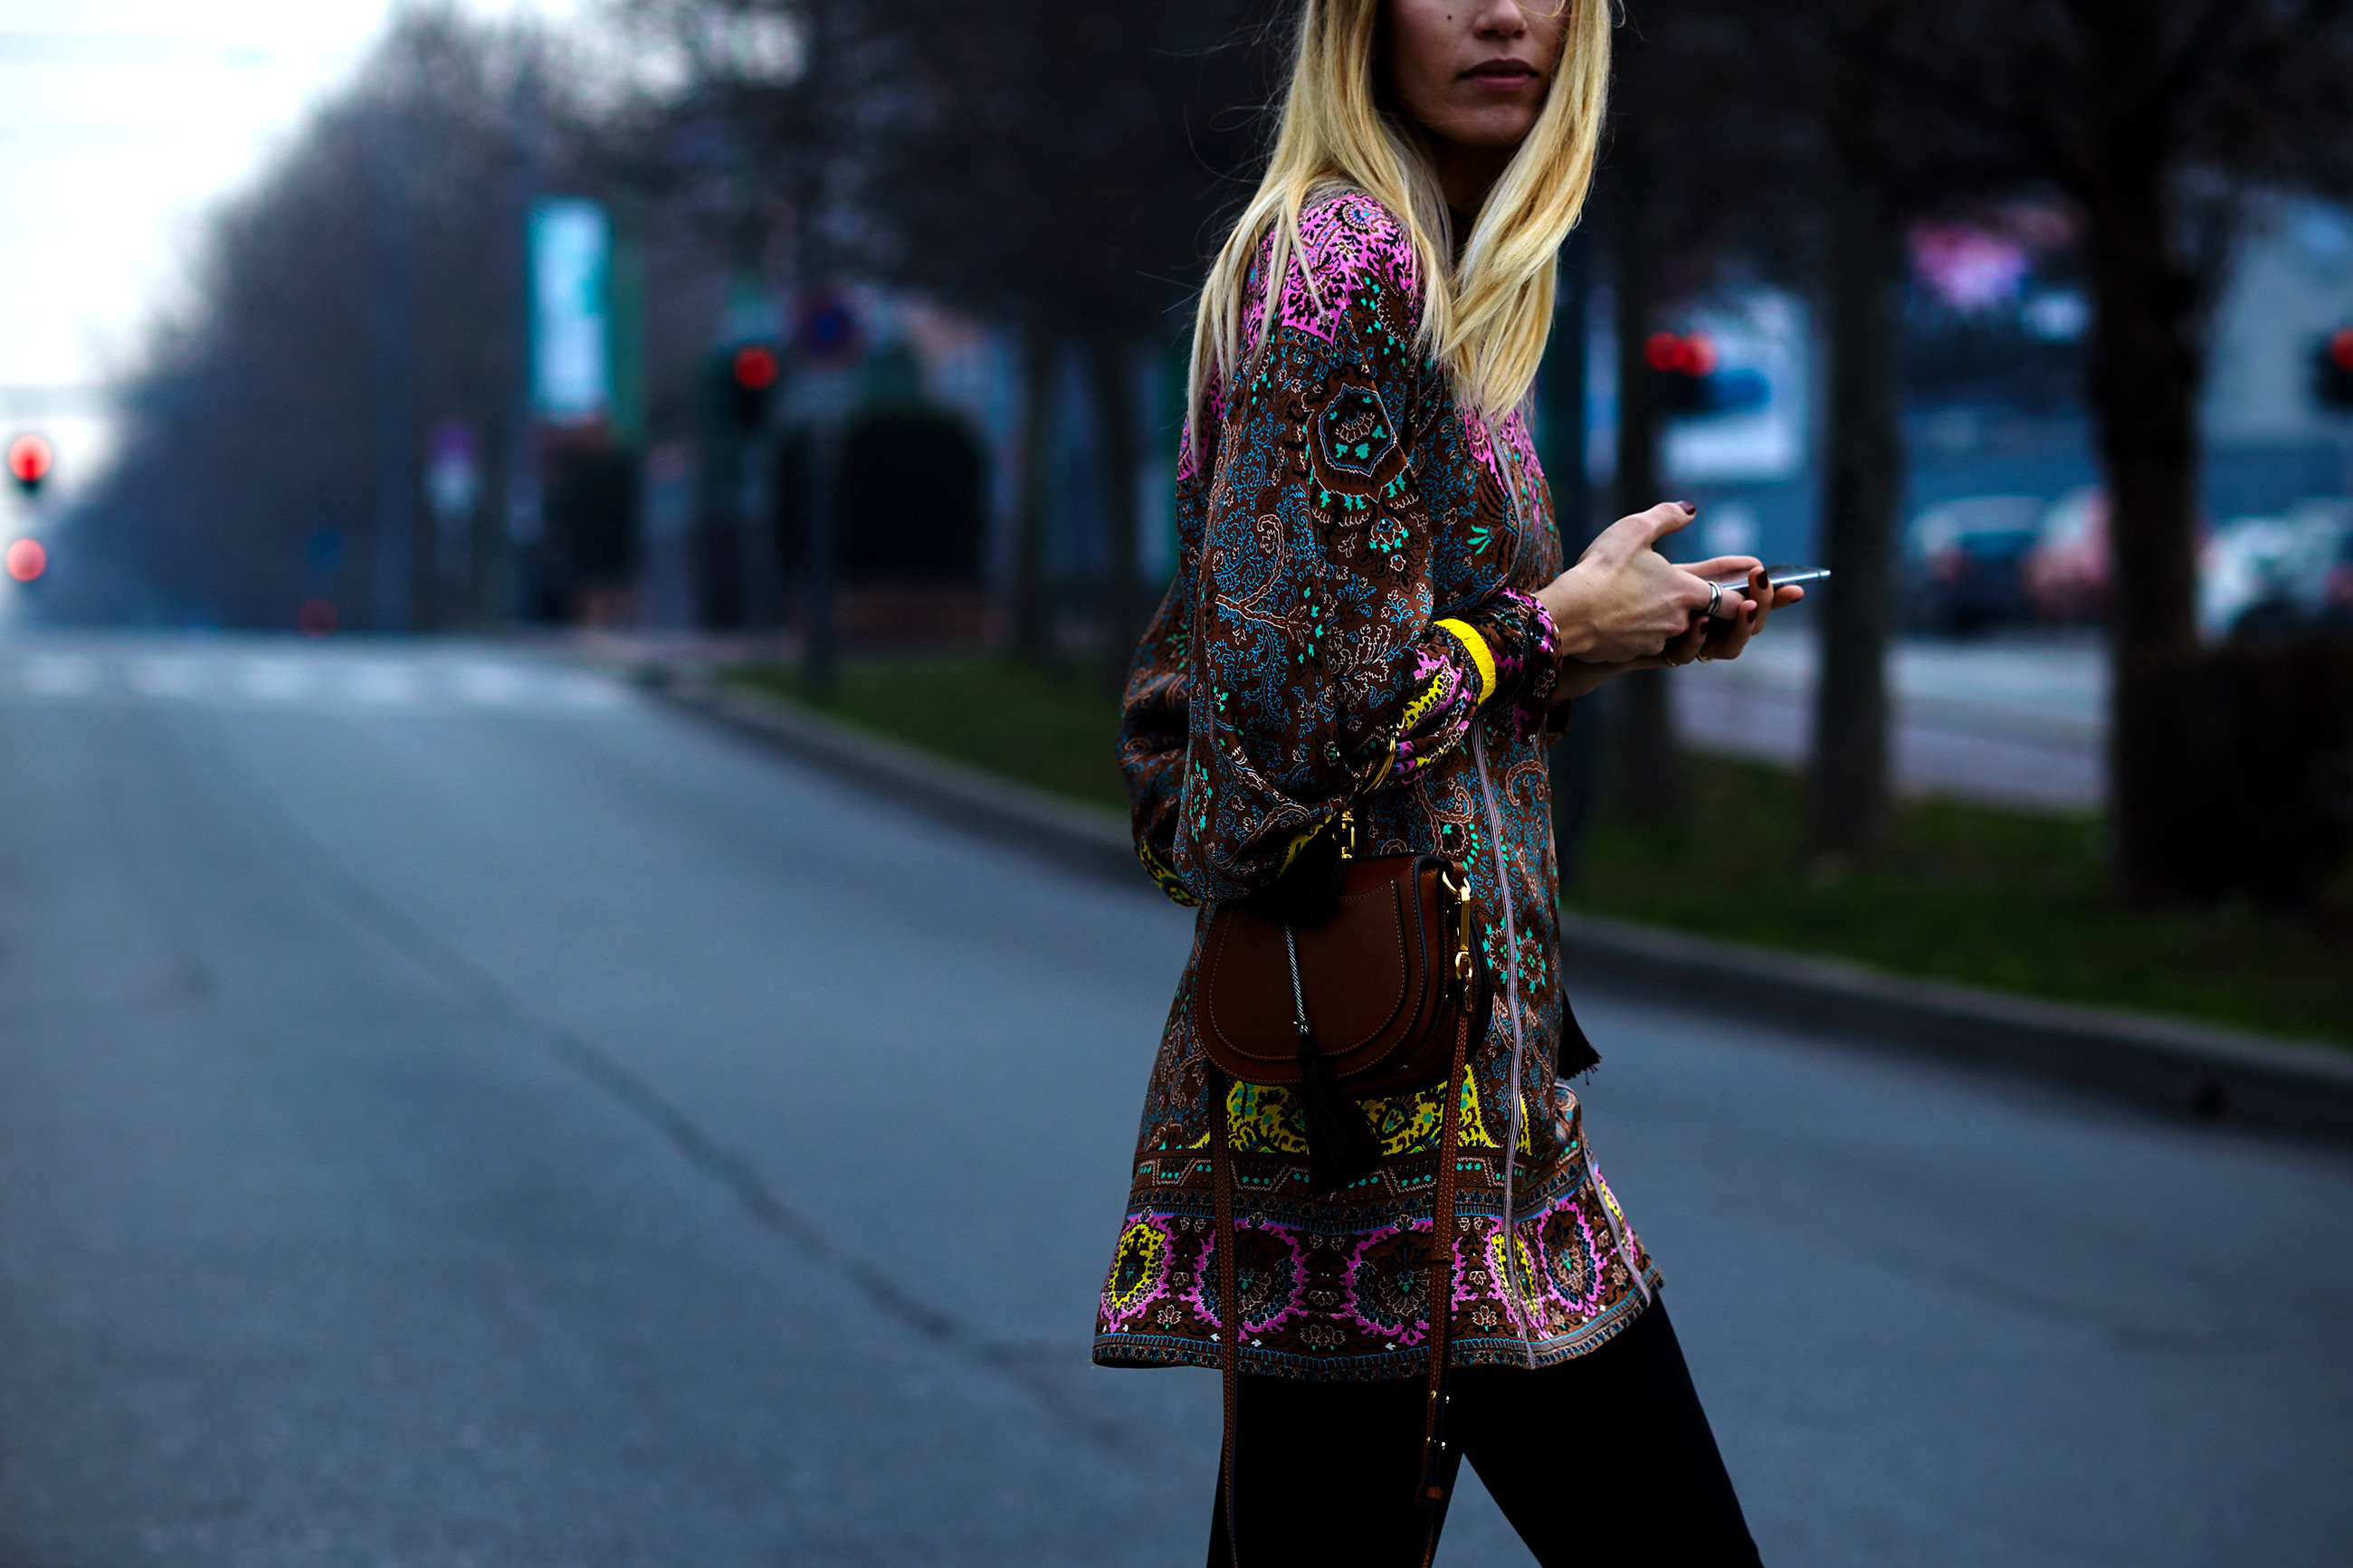 Veronika Heilbrunner wearing a printed dress and Chloe bag after the Etro FW 17-18 fashion show in Milan, Italy